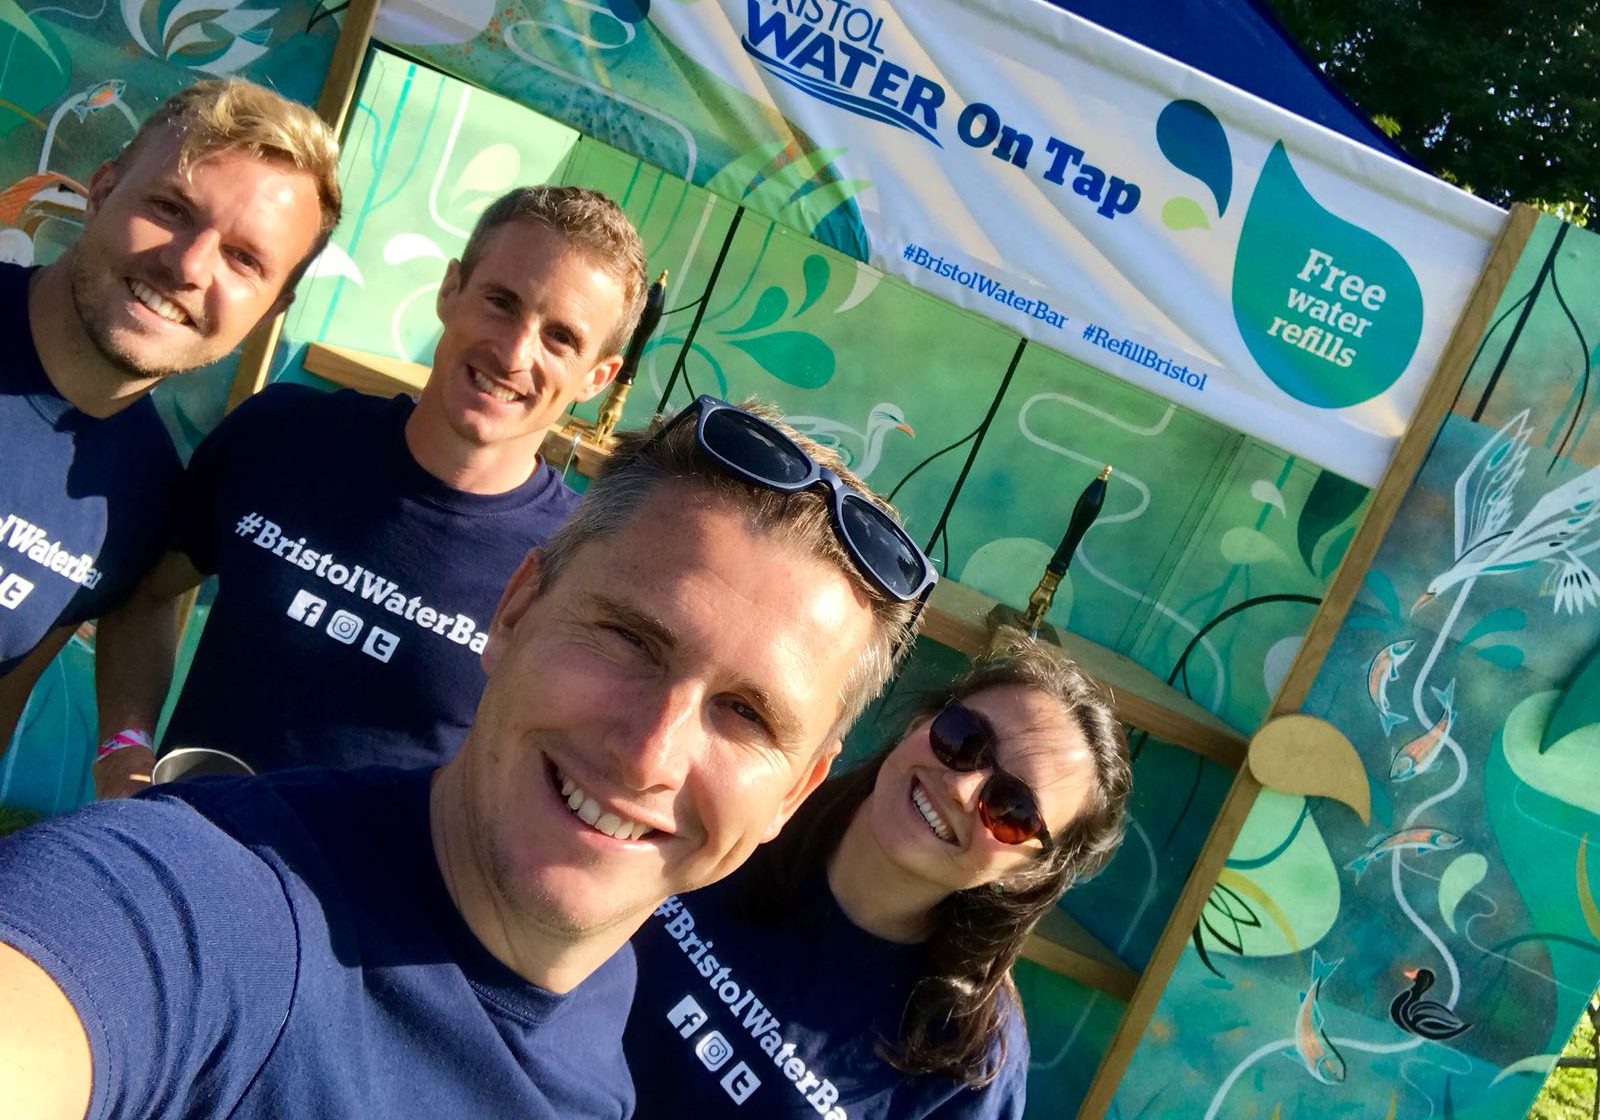 Four Bristol Water Workers in front of the free water bar at a festival 